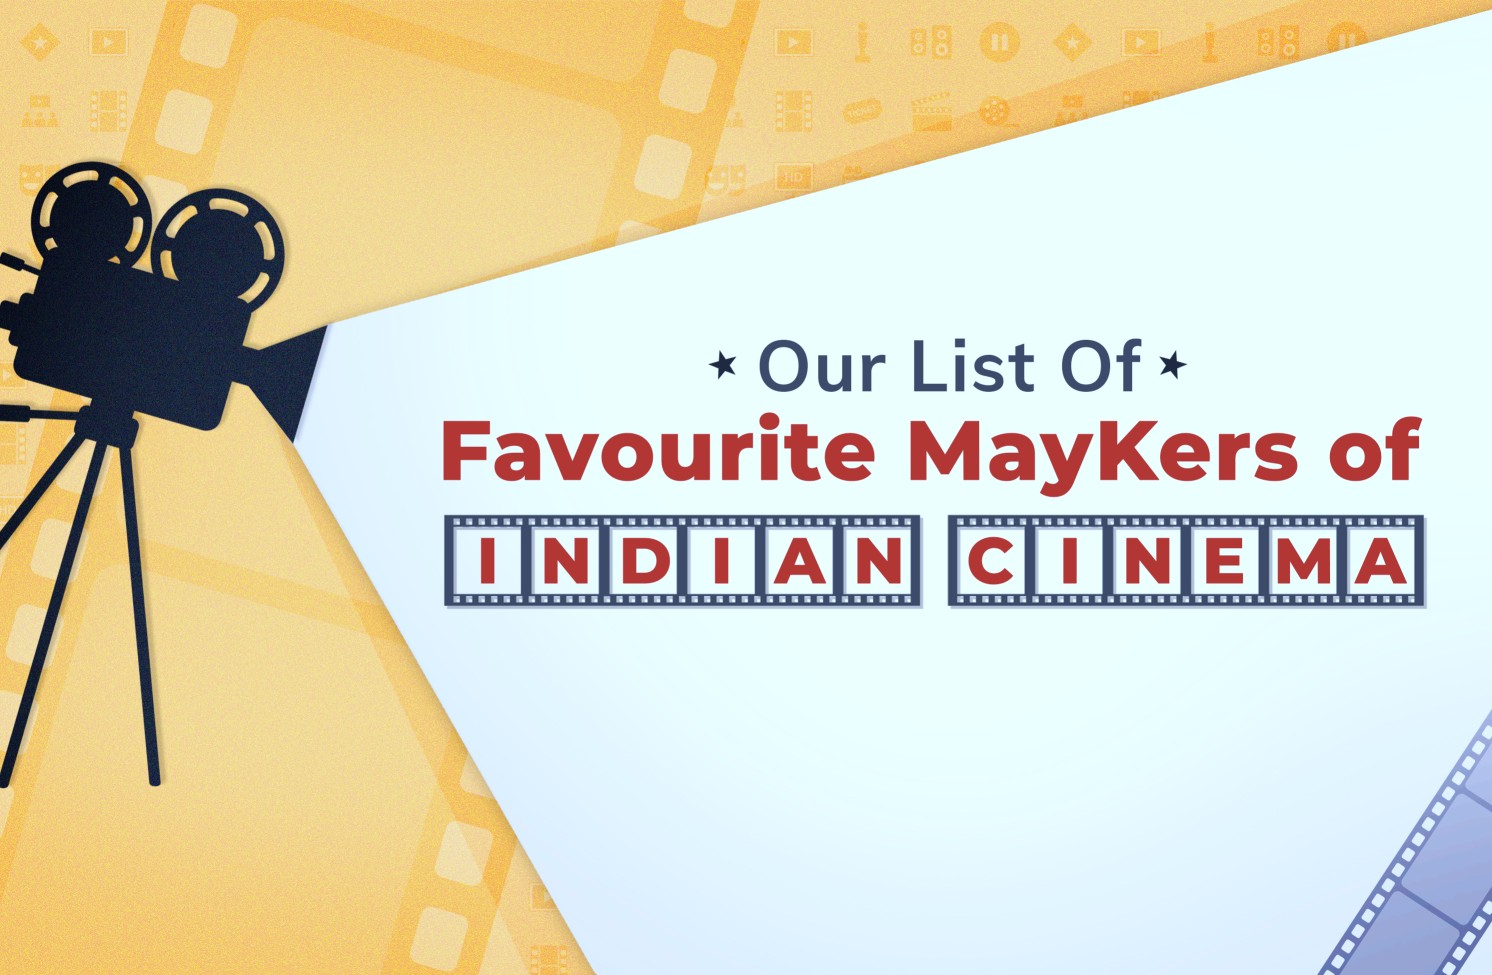 Eminent MayKers of Indian Cinema